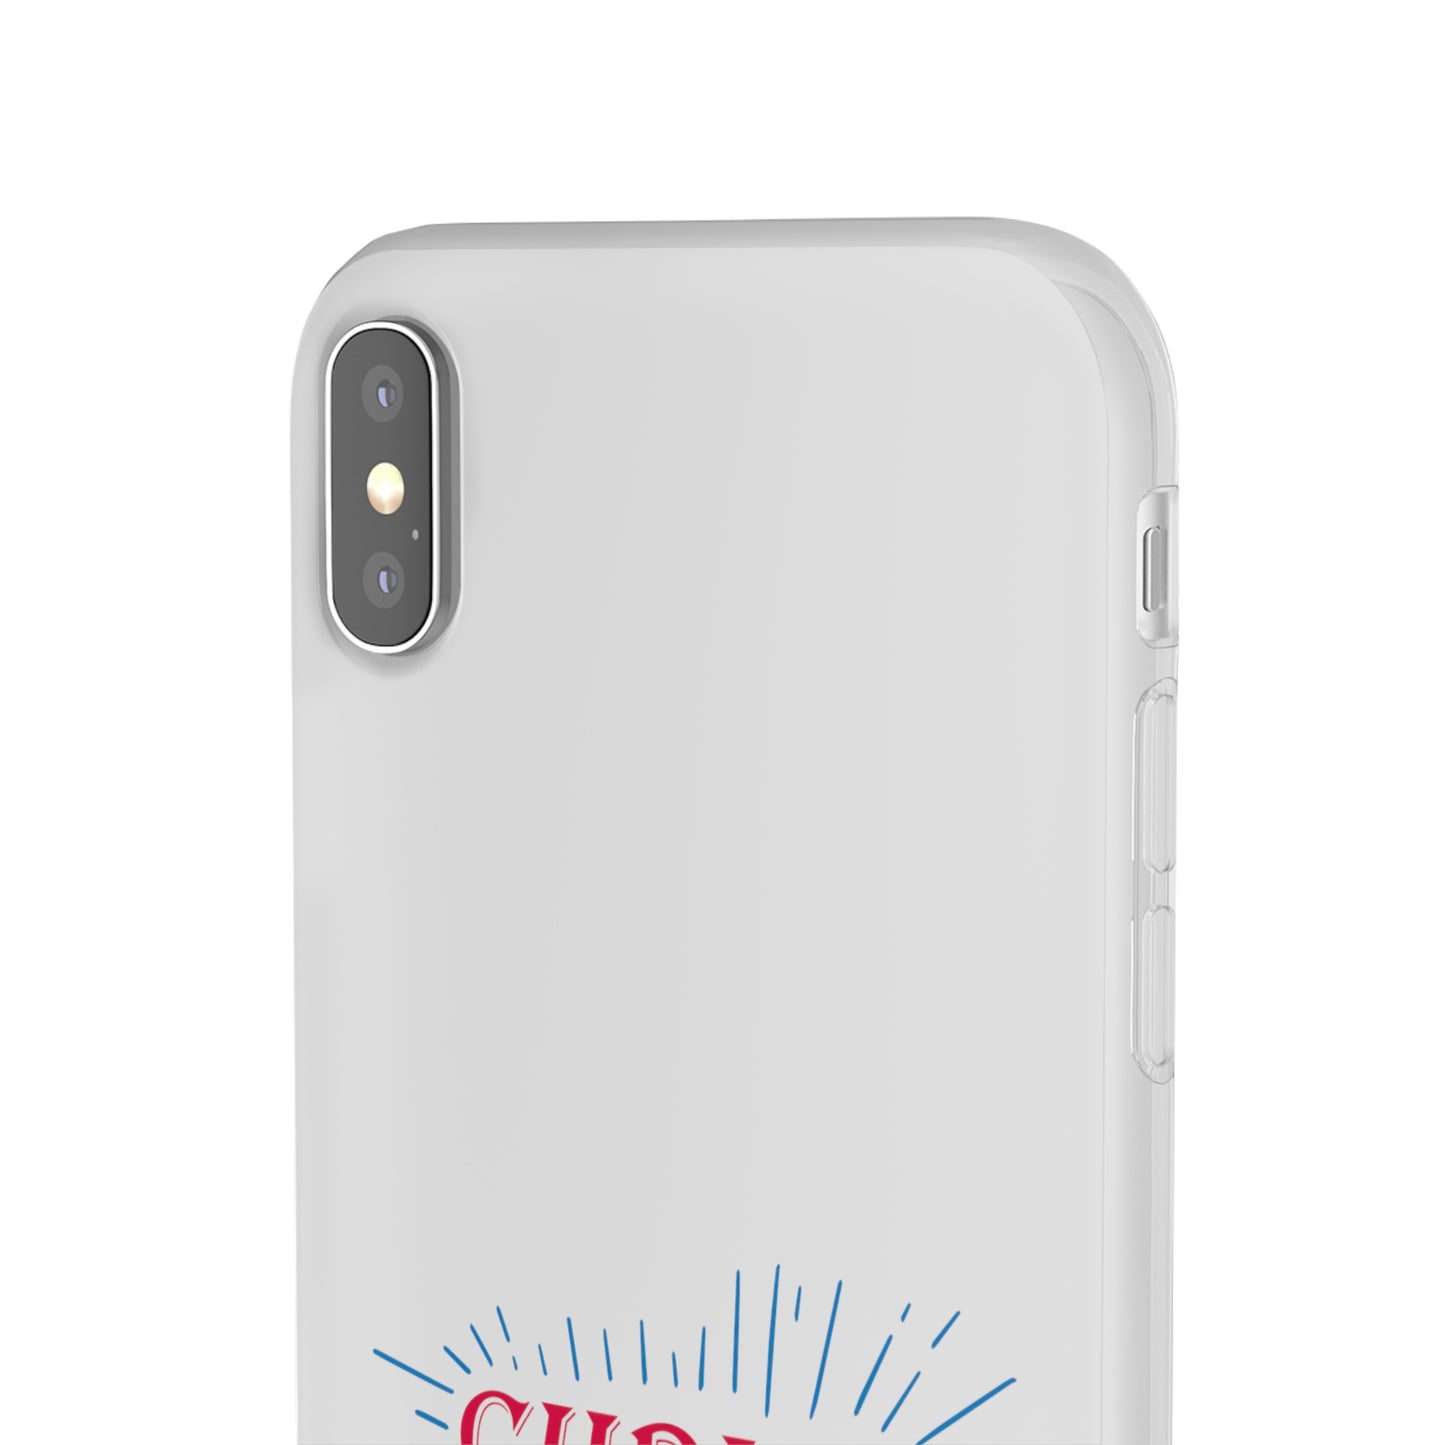 Christ Is My Firm Foundation Flexi Phone Case